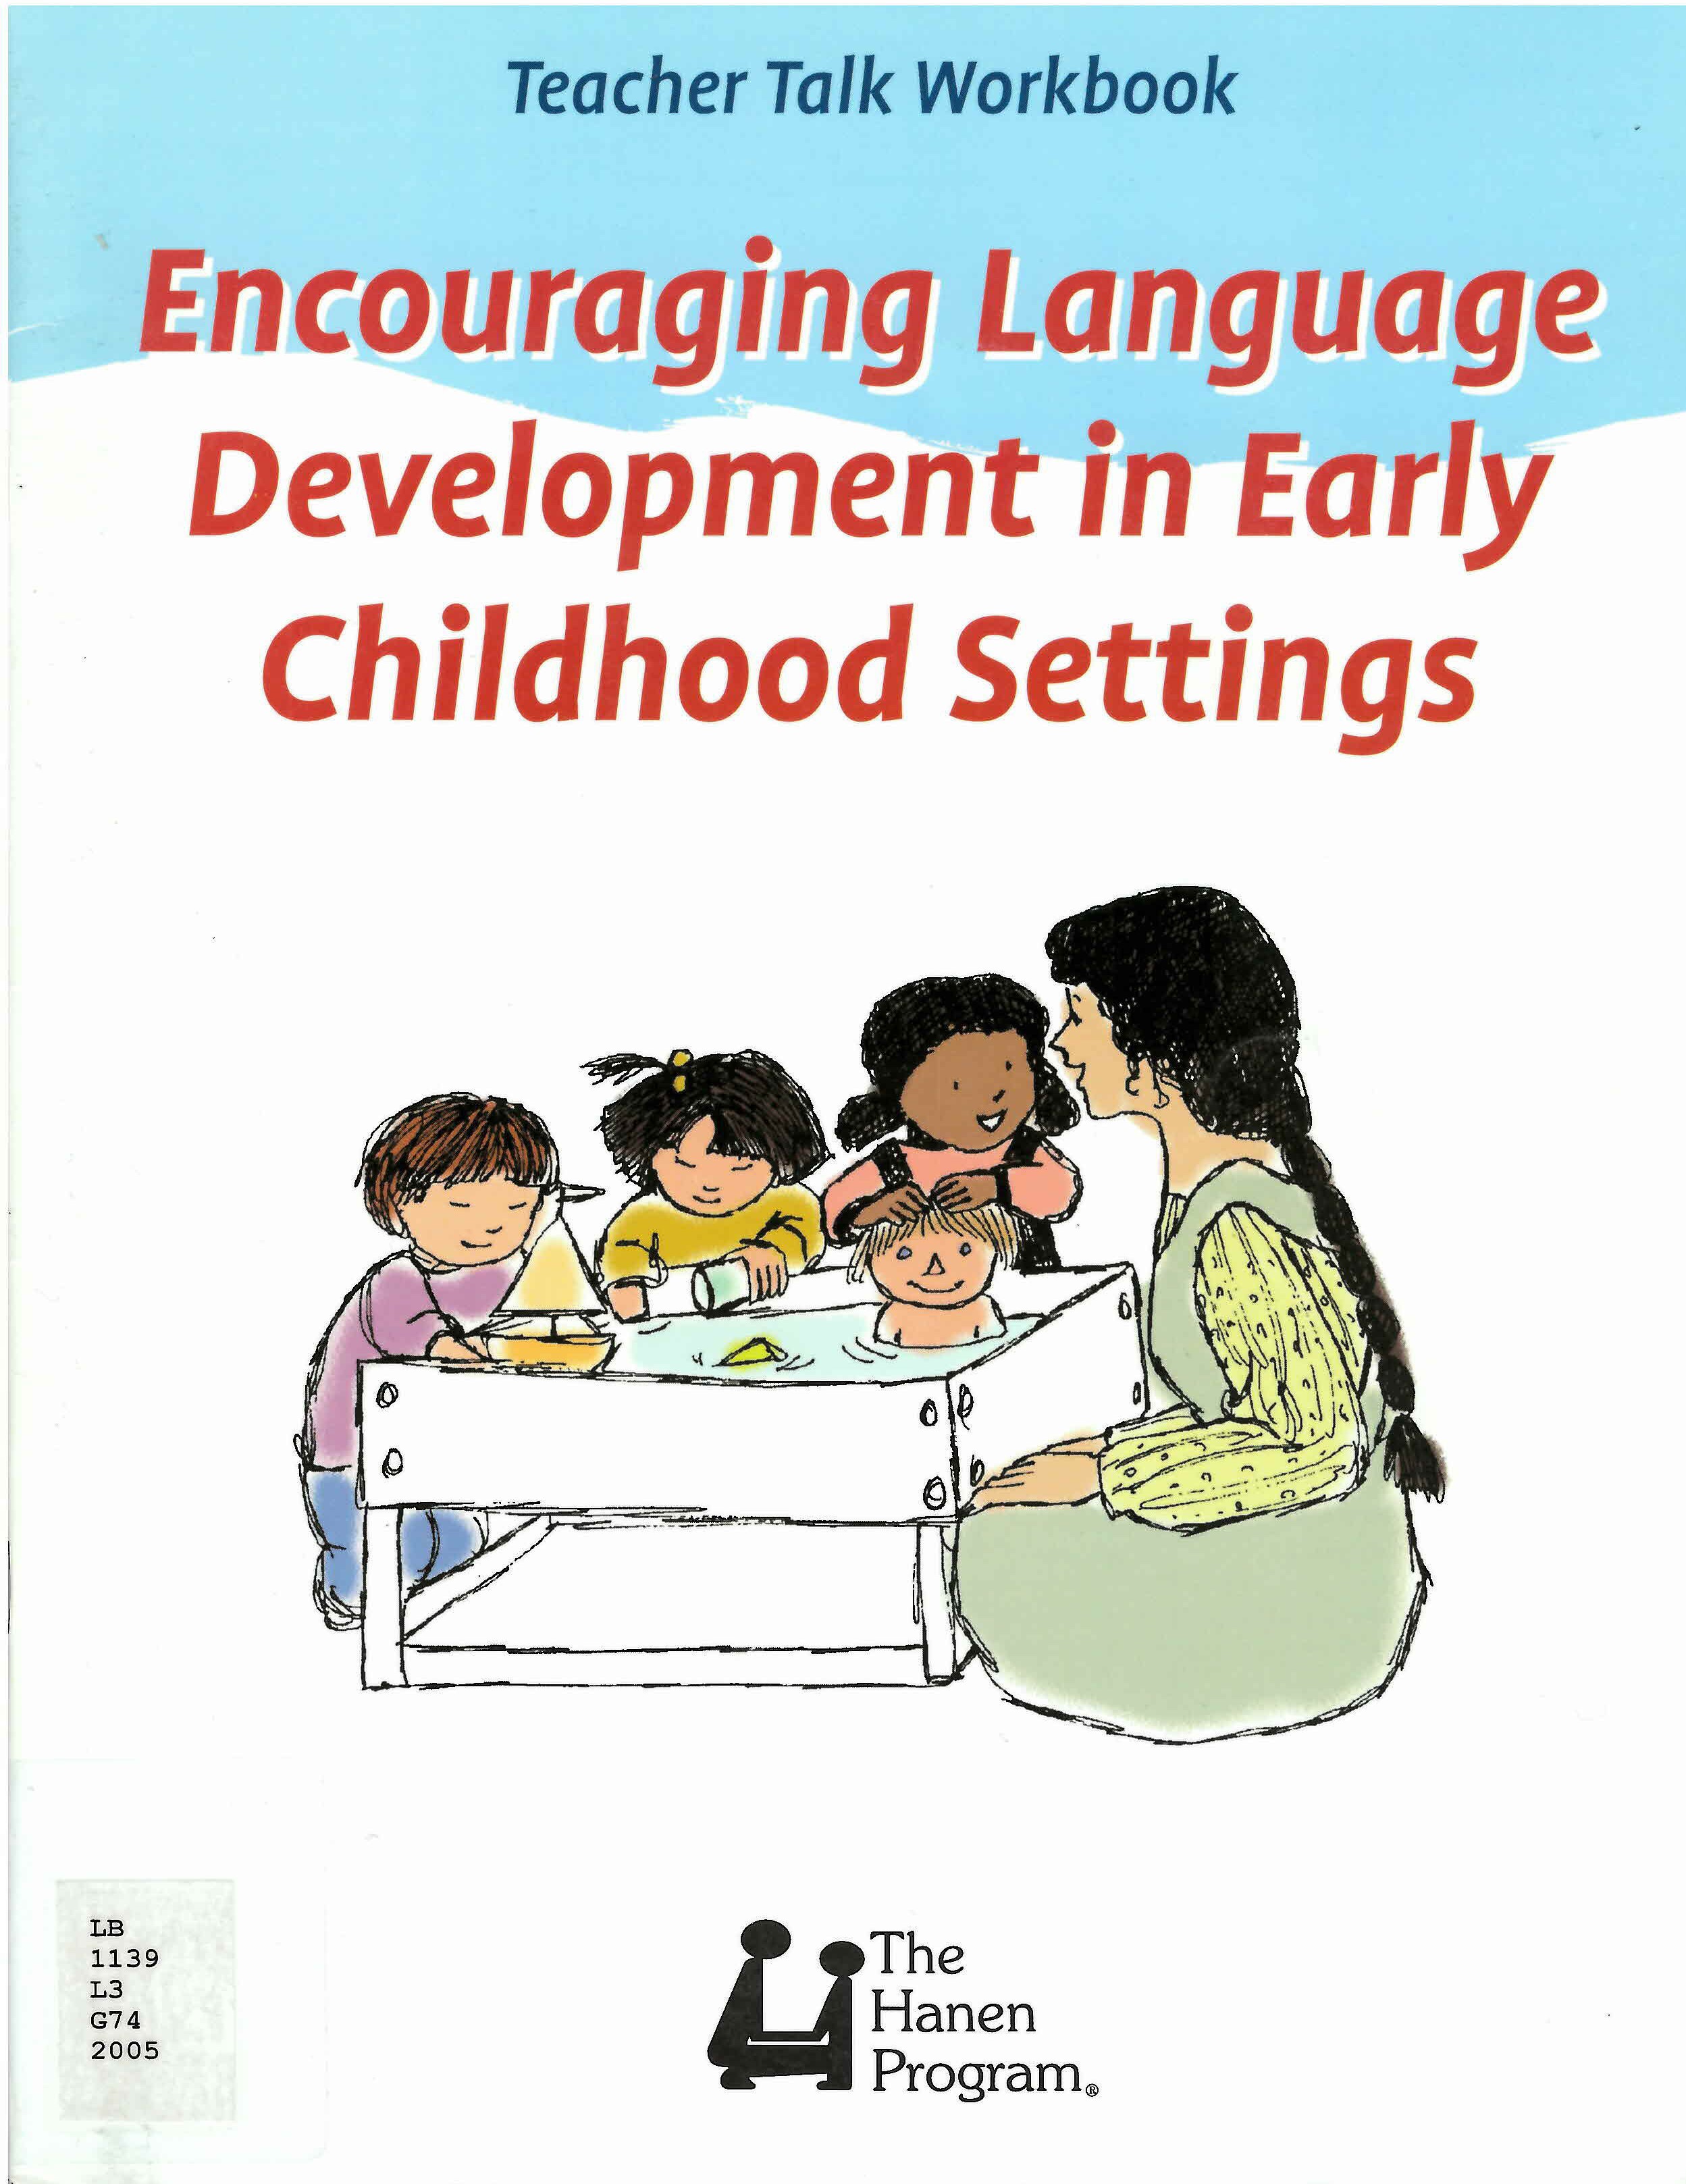 Encouraging language development in early childhood settings